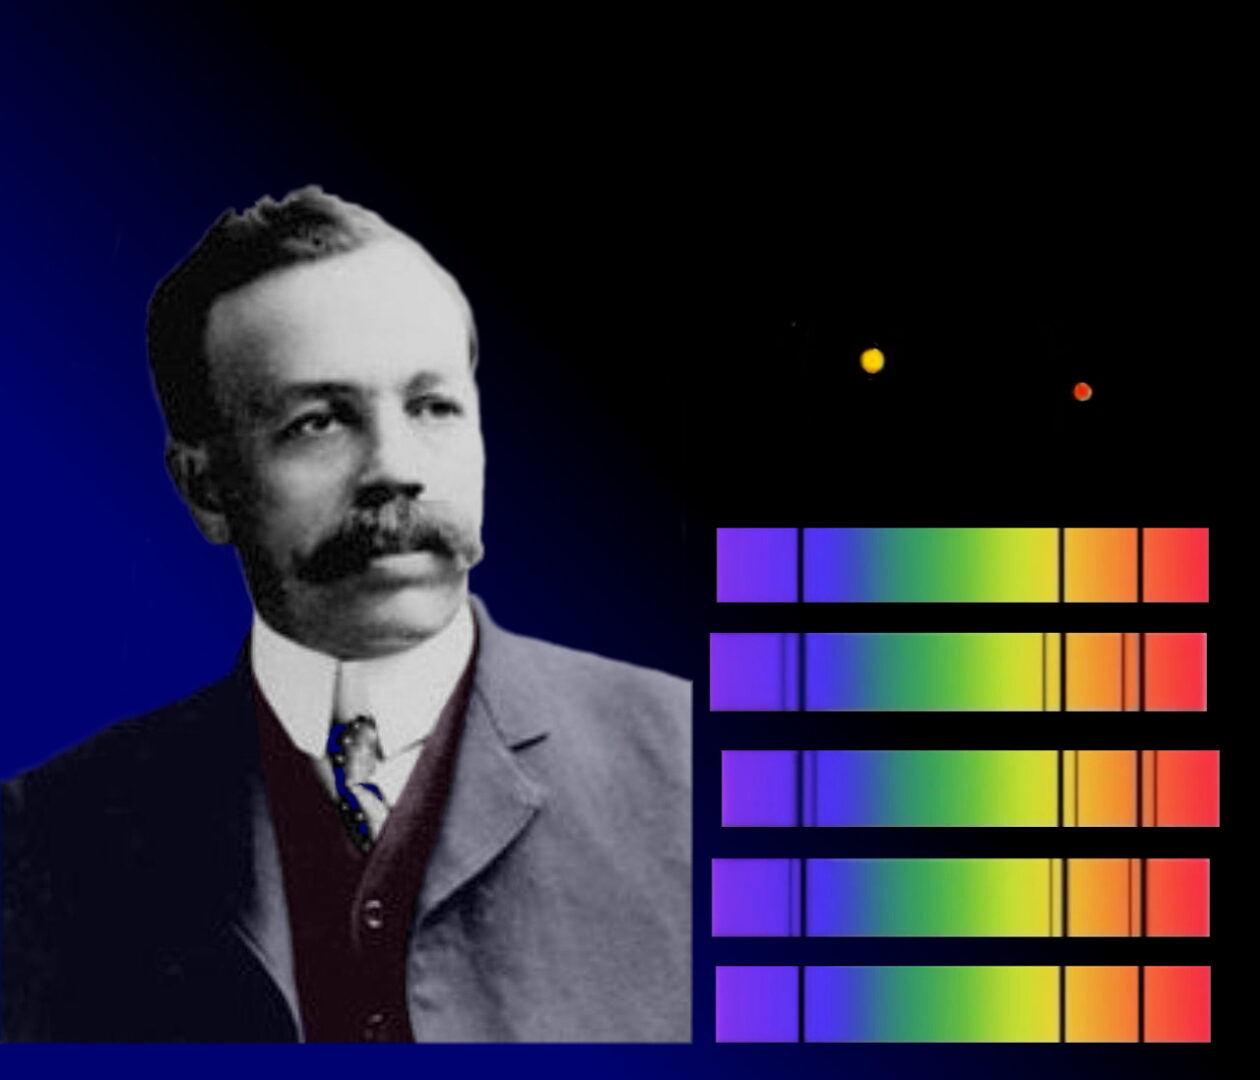 Image of a man and colour gradients